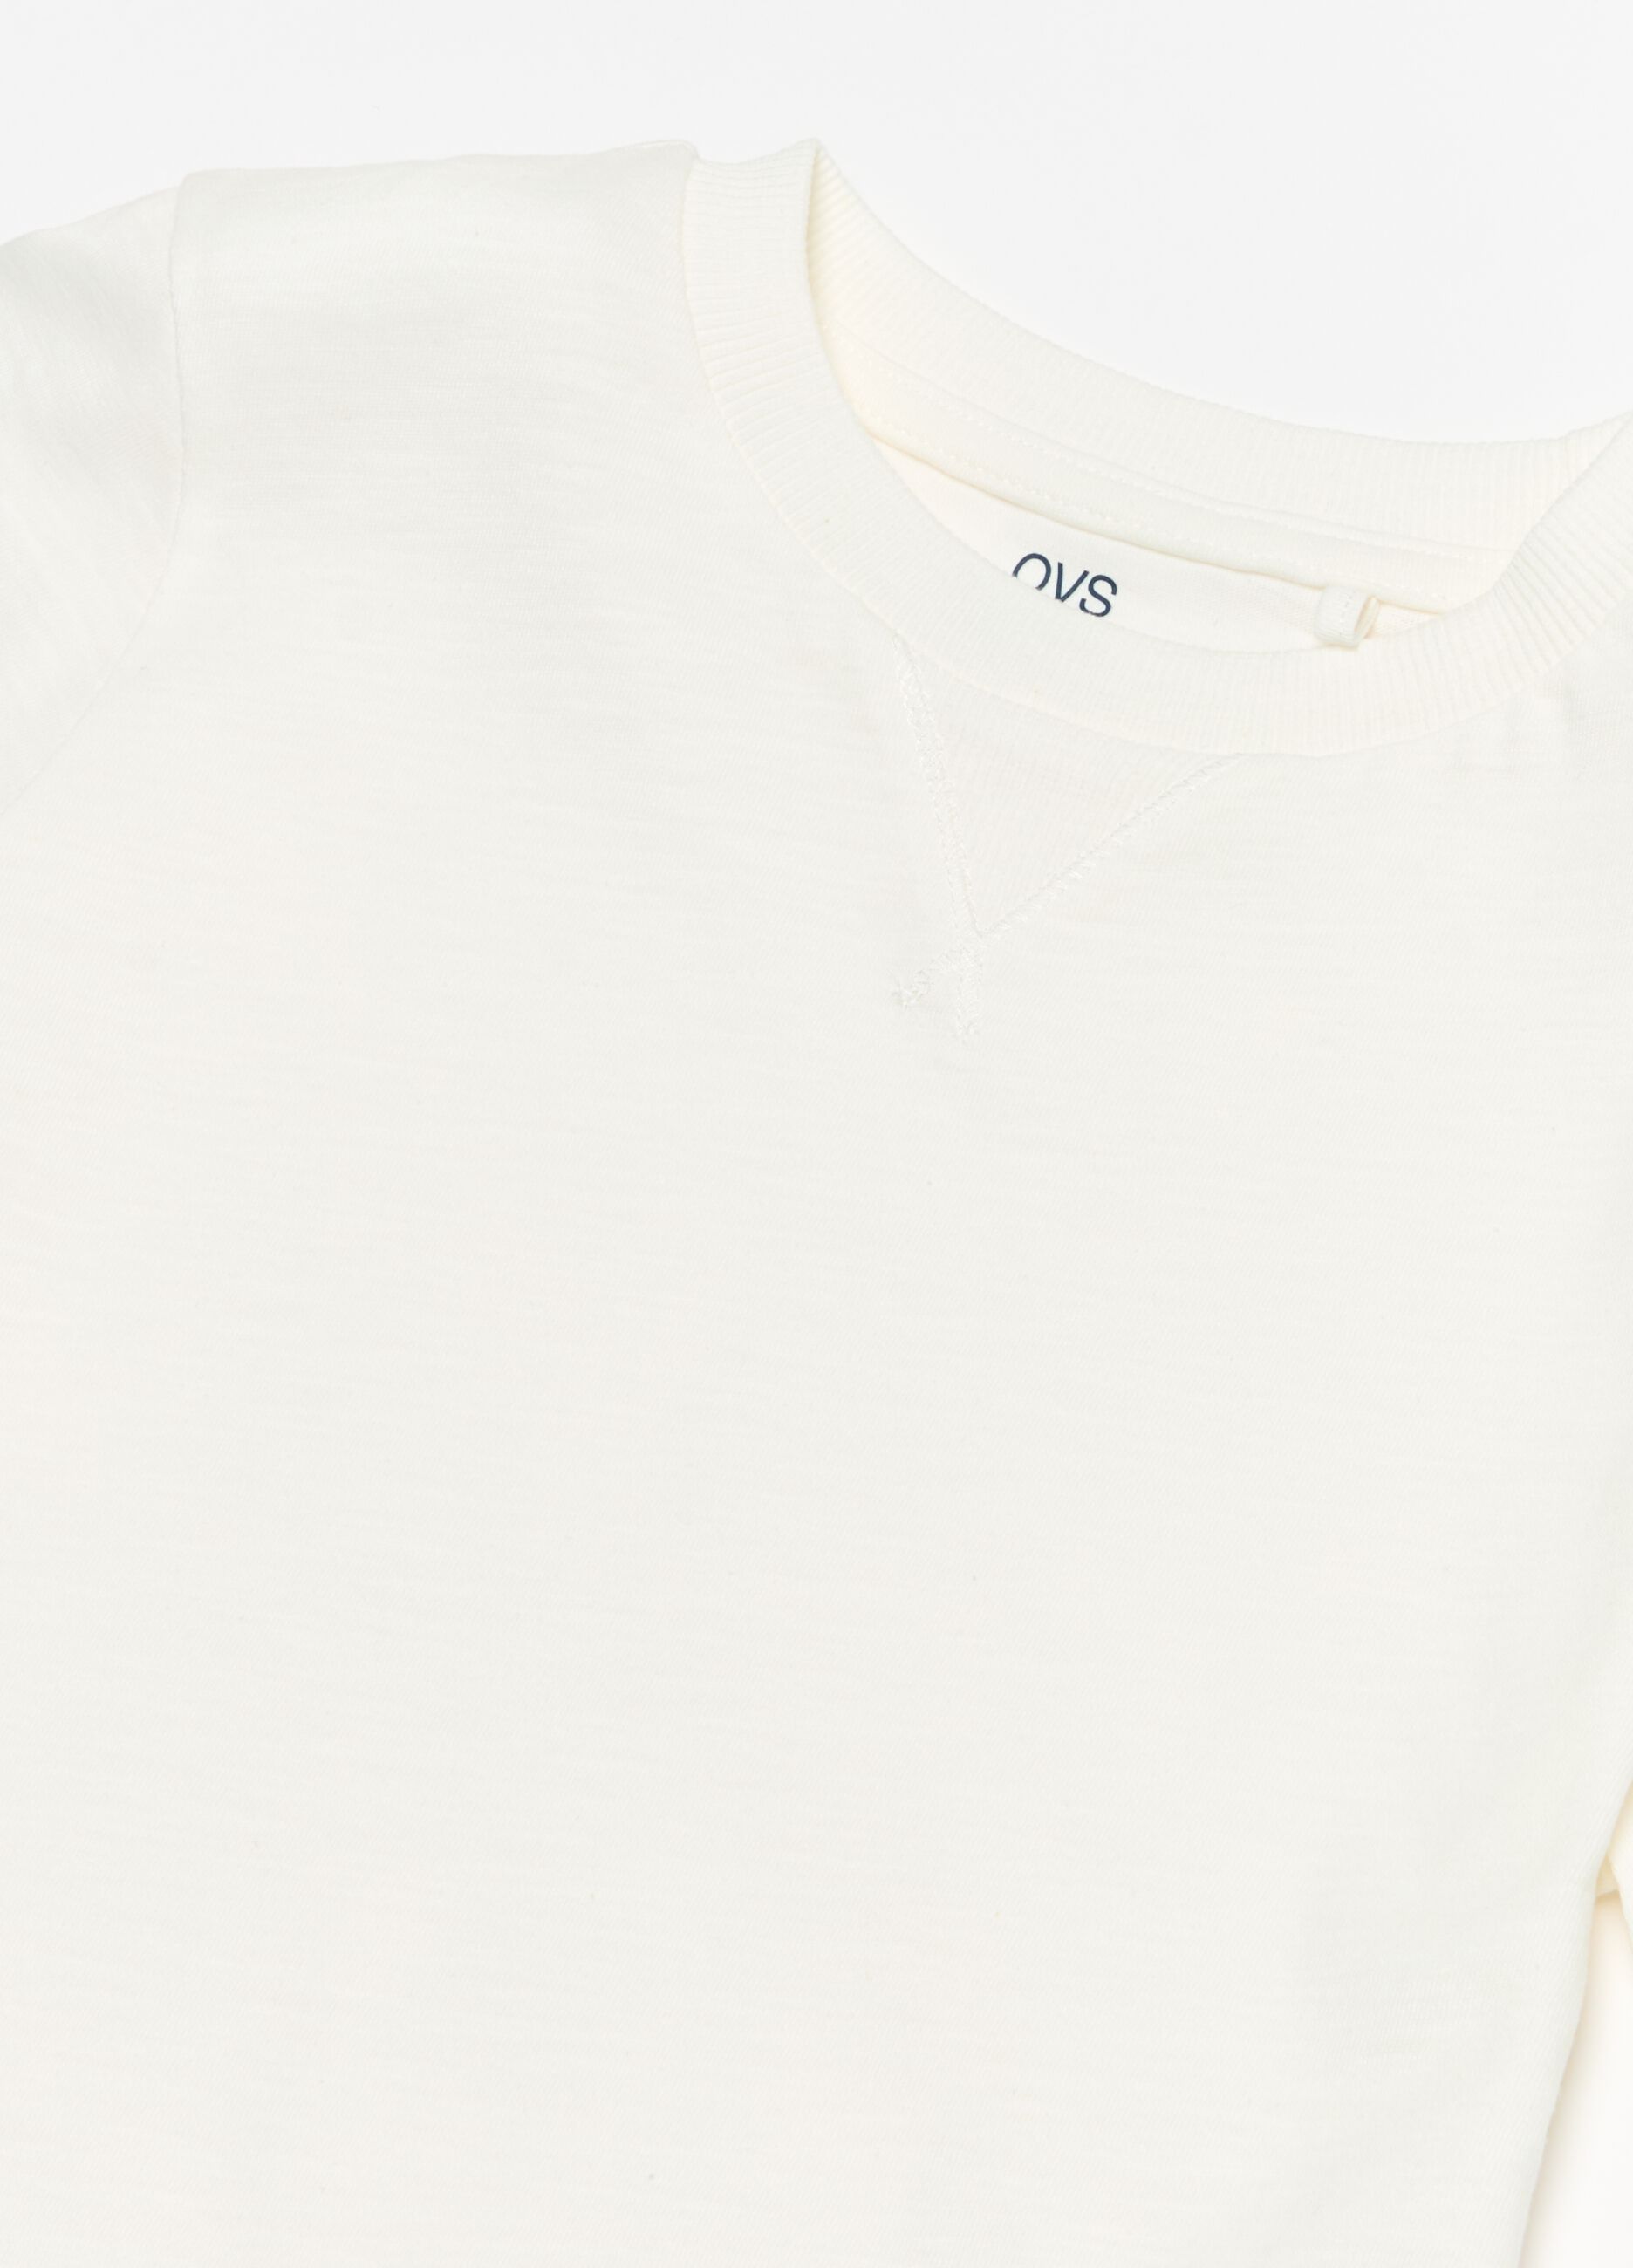 Cotton T-shirt with detail